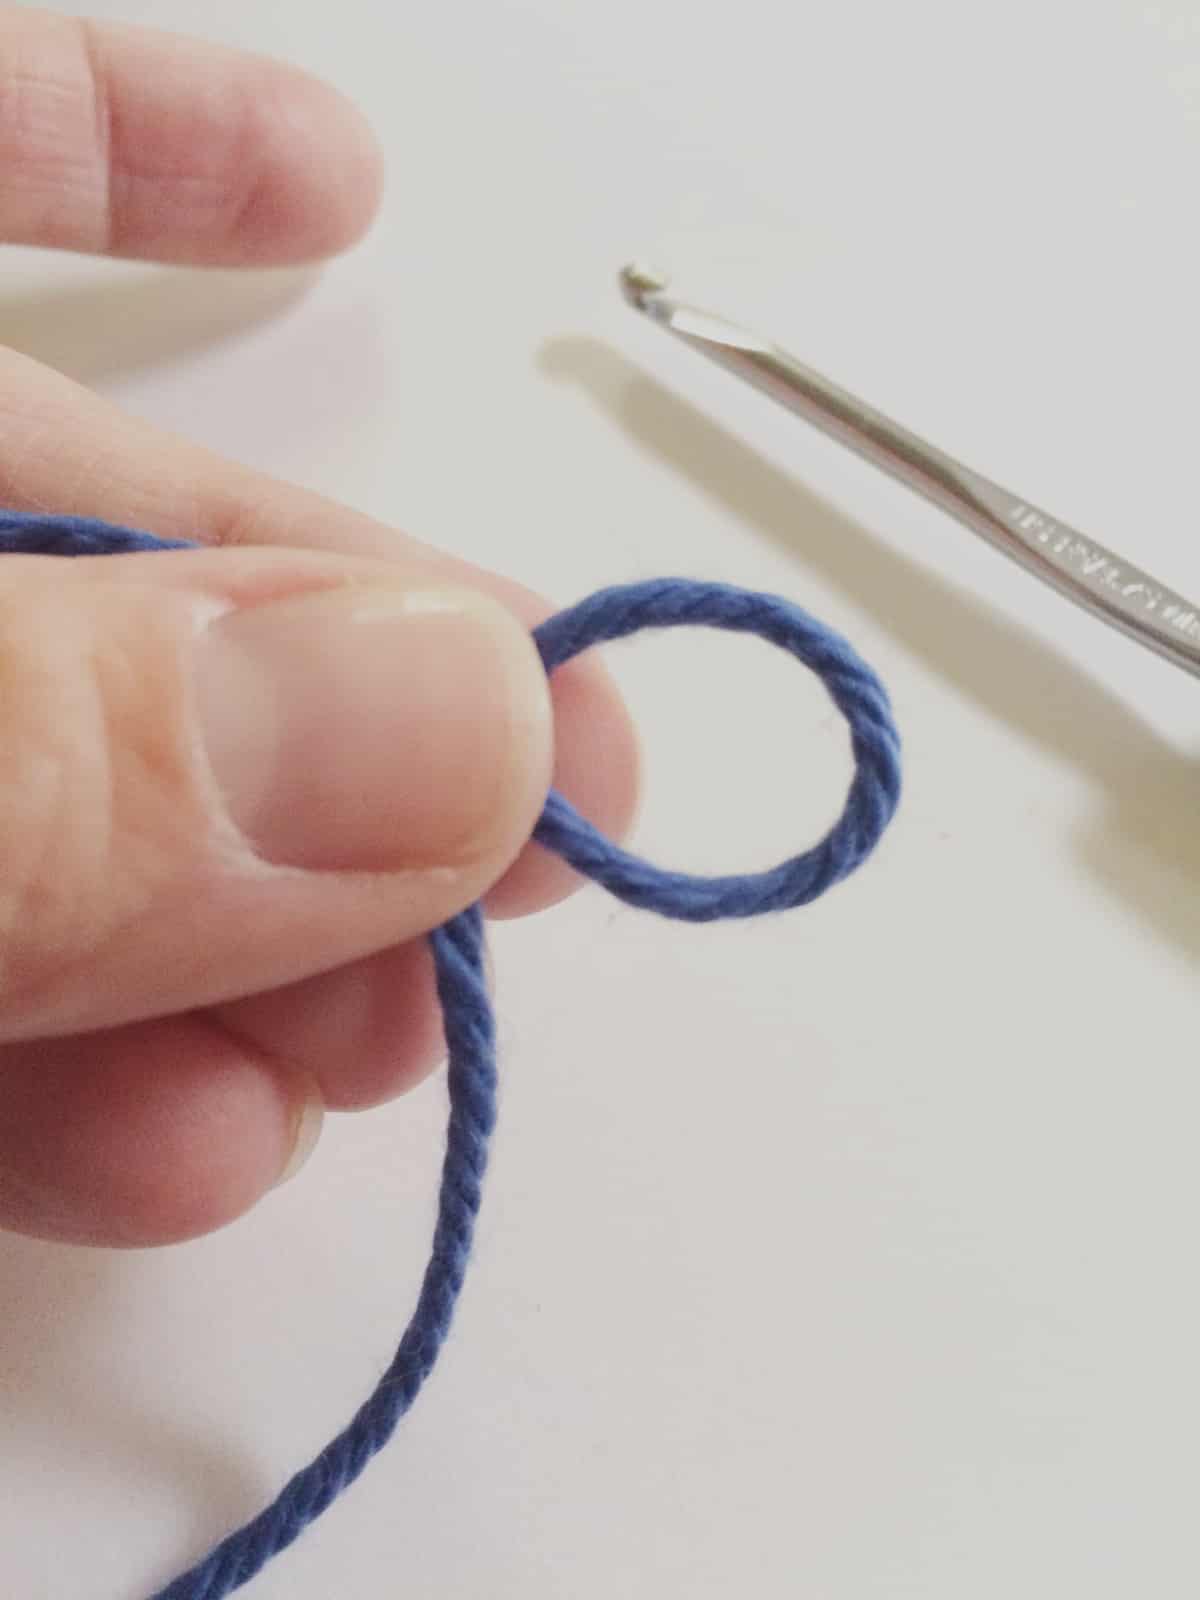 Pinch slip knot closed and slide off finger.